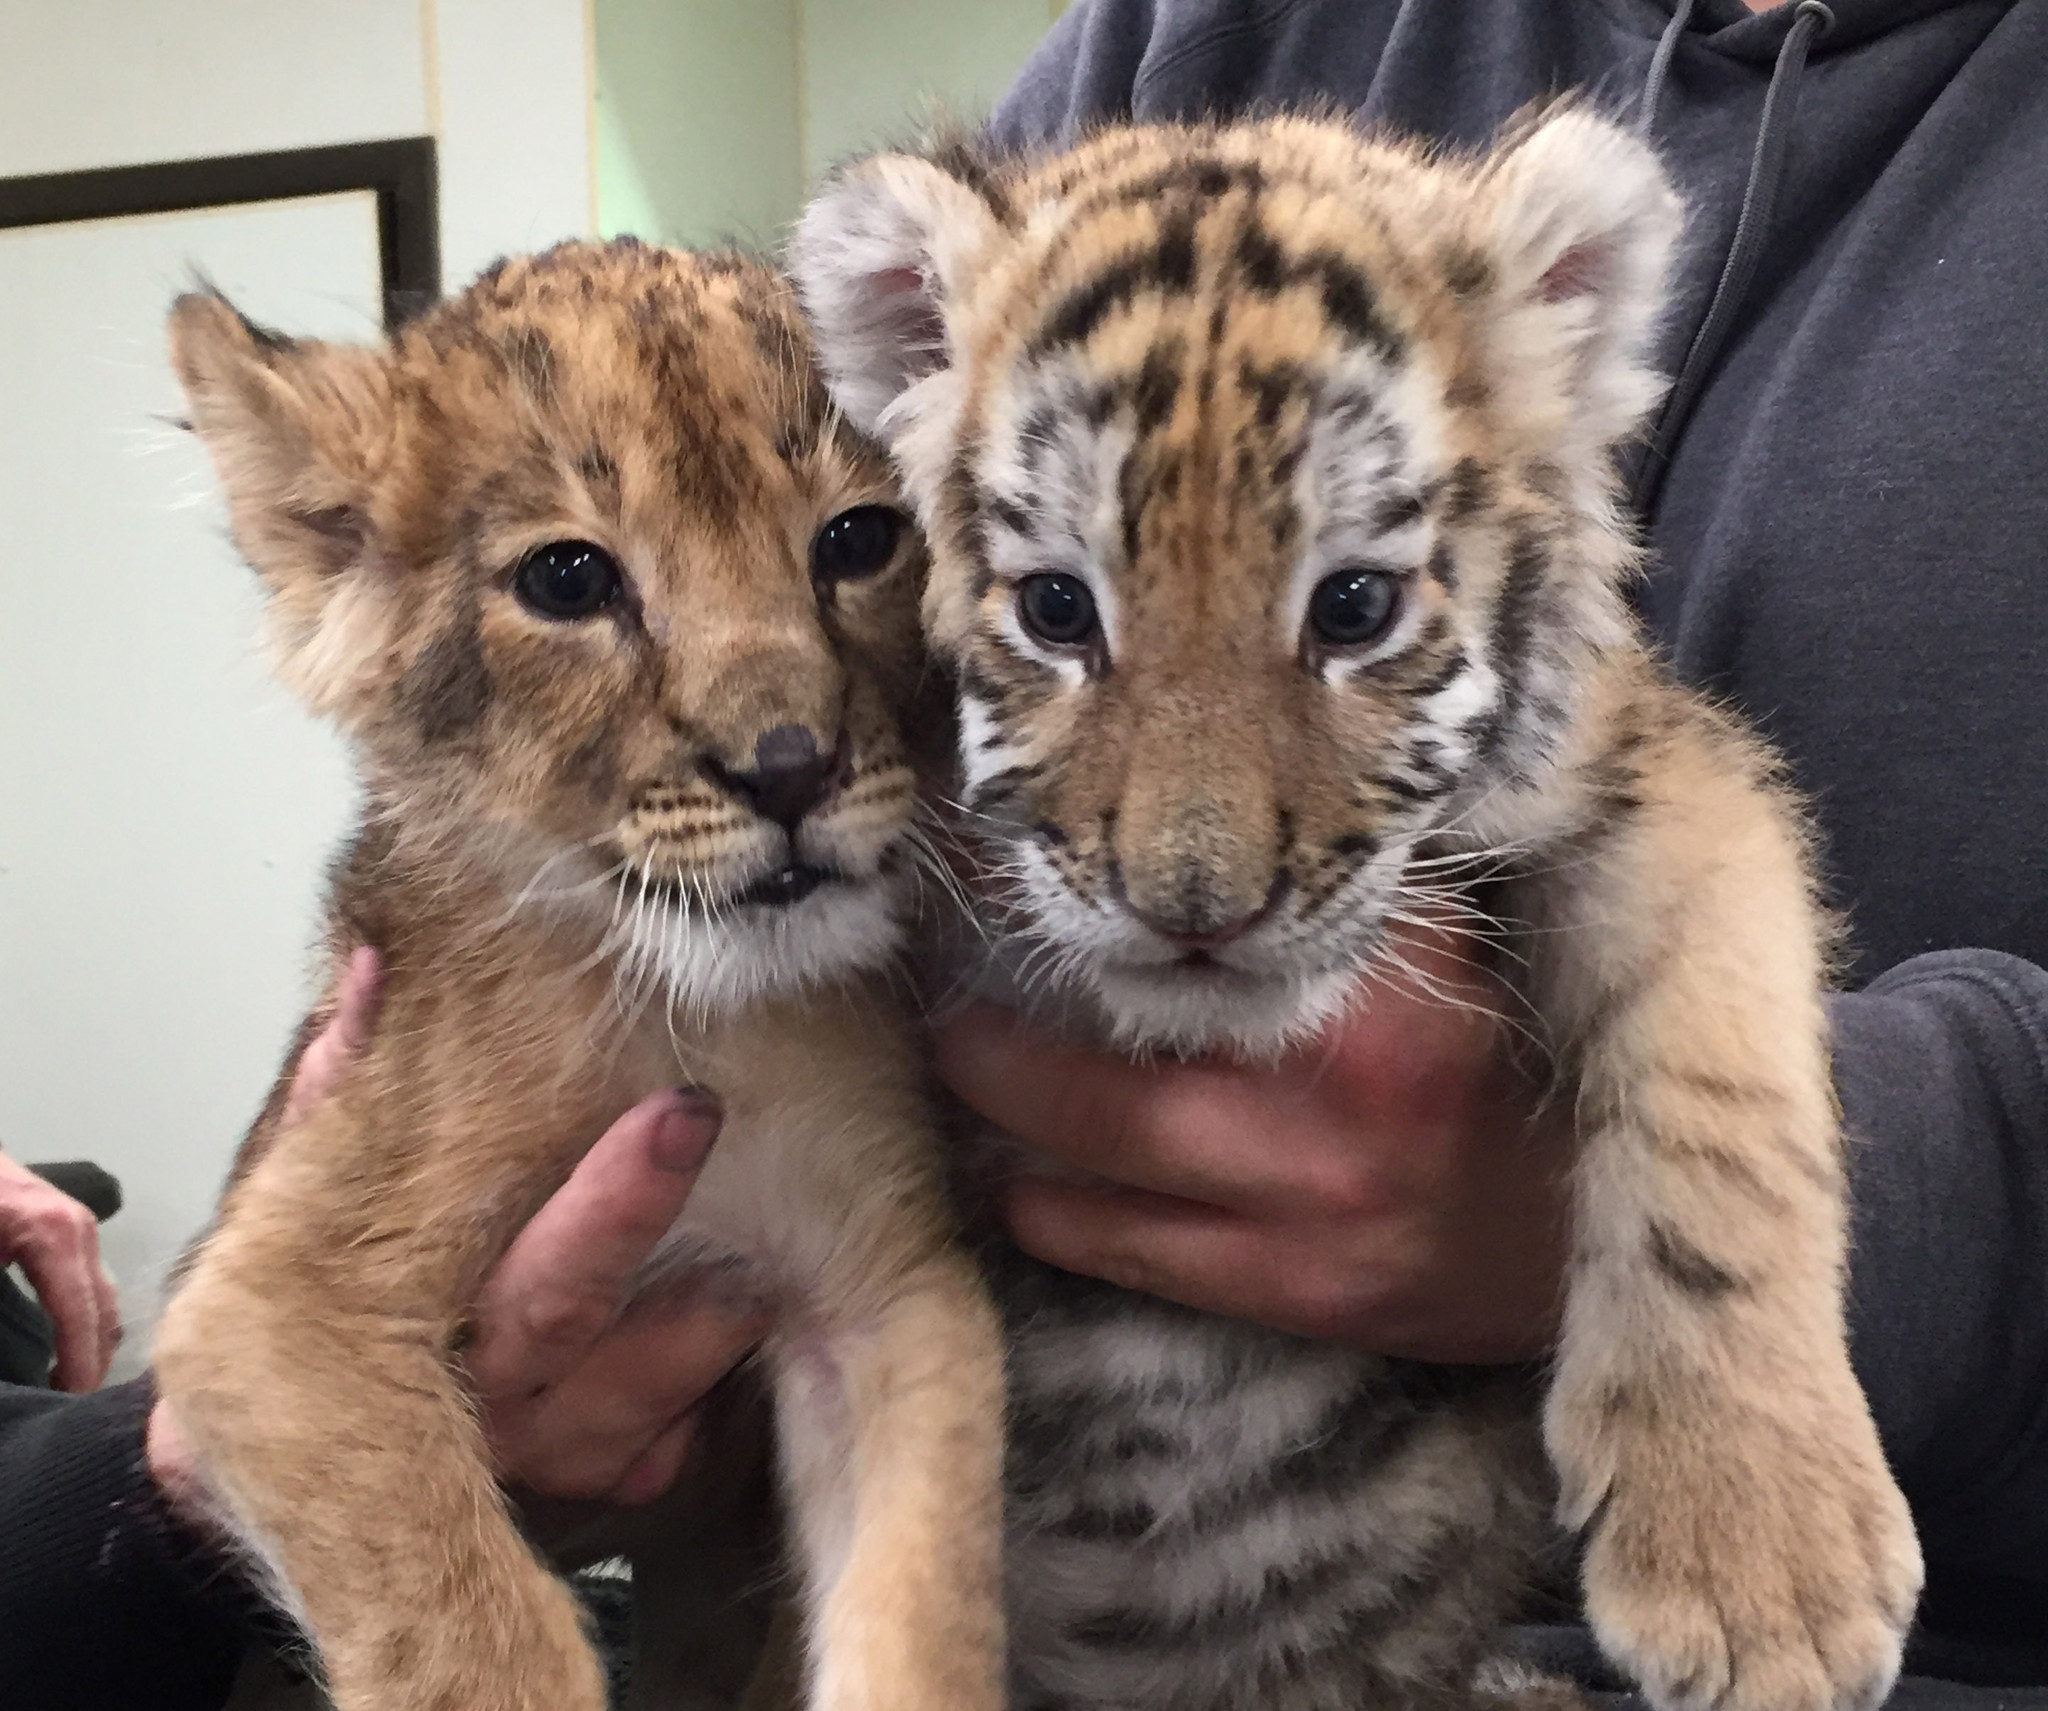 Baby tiger and lion being raised together at Six Flags - The Morning ...